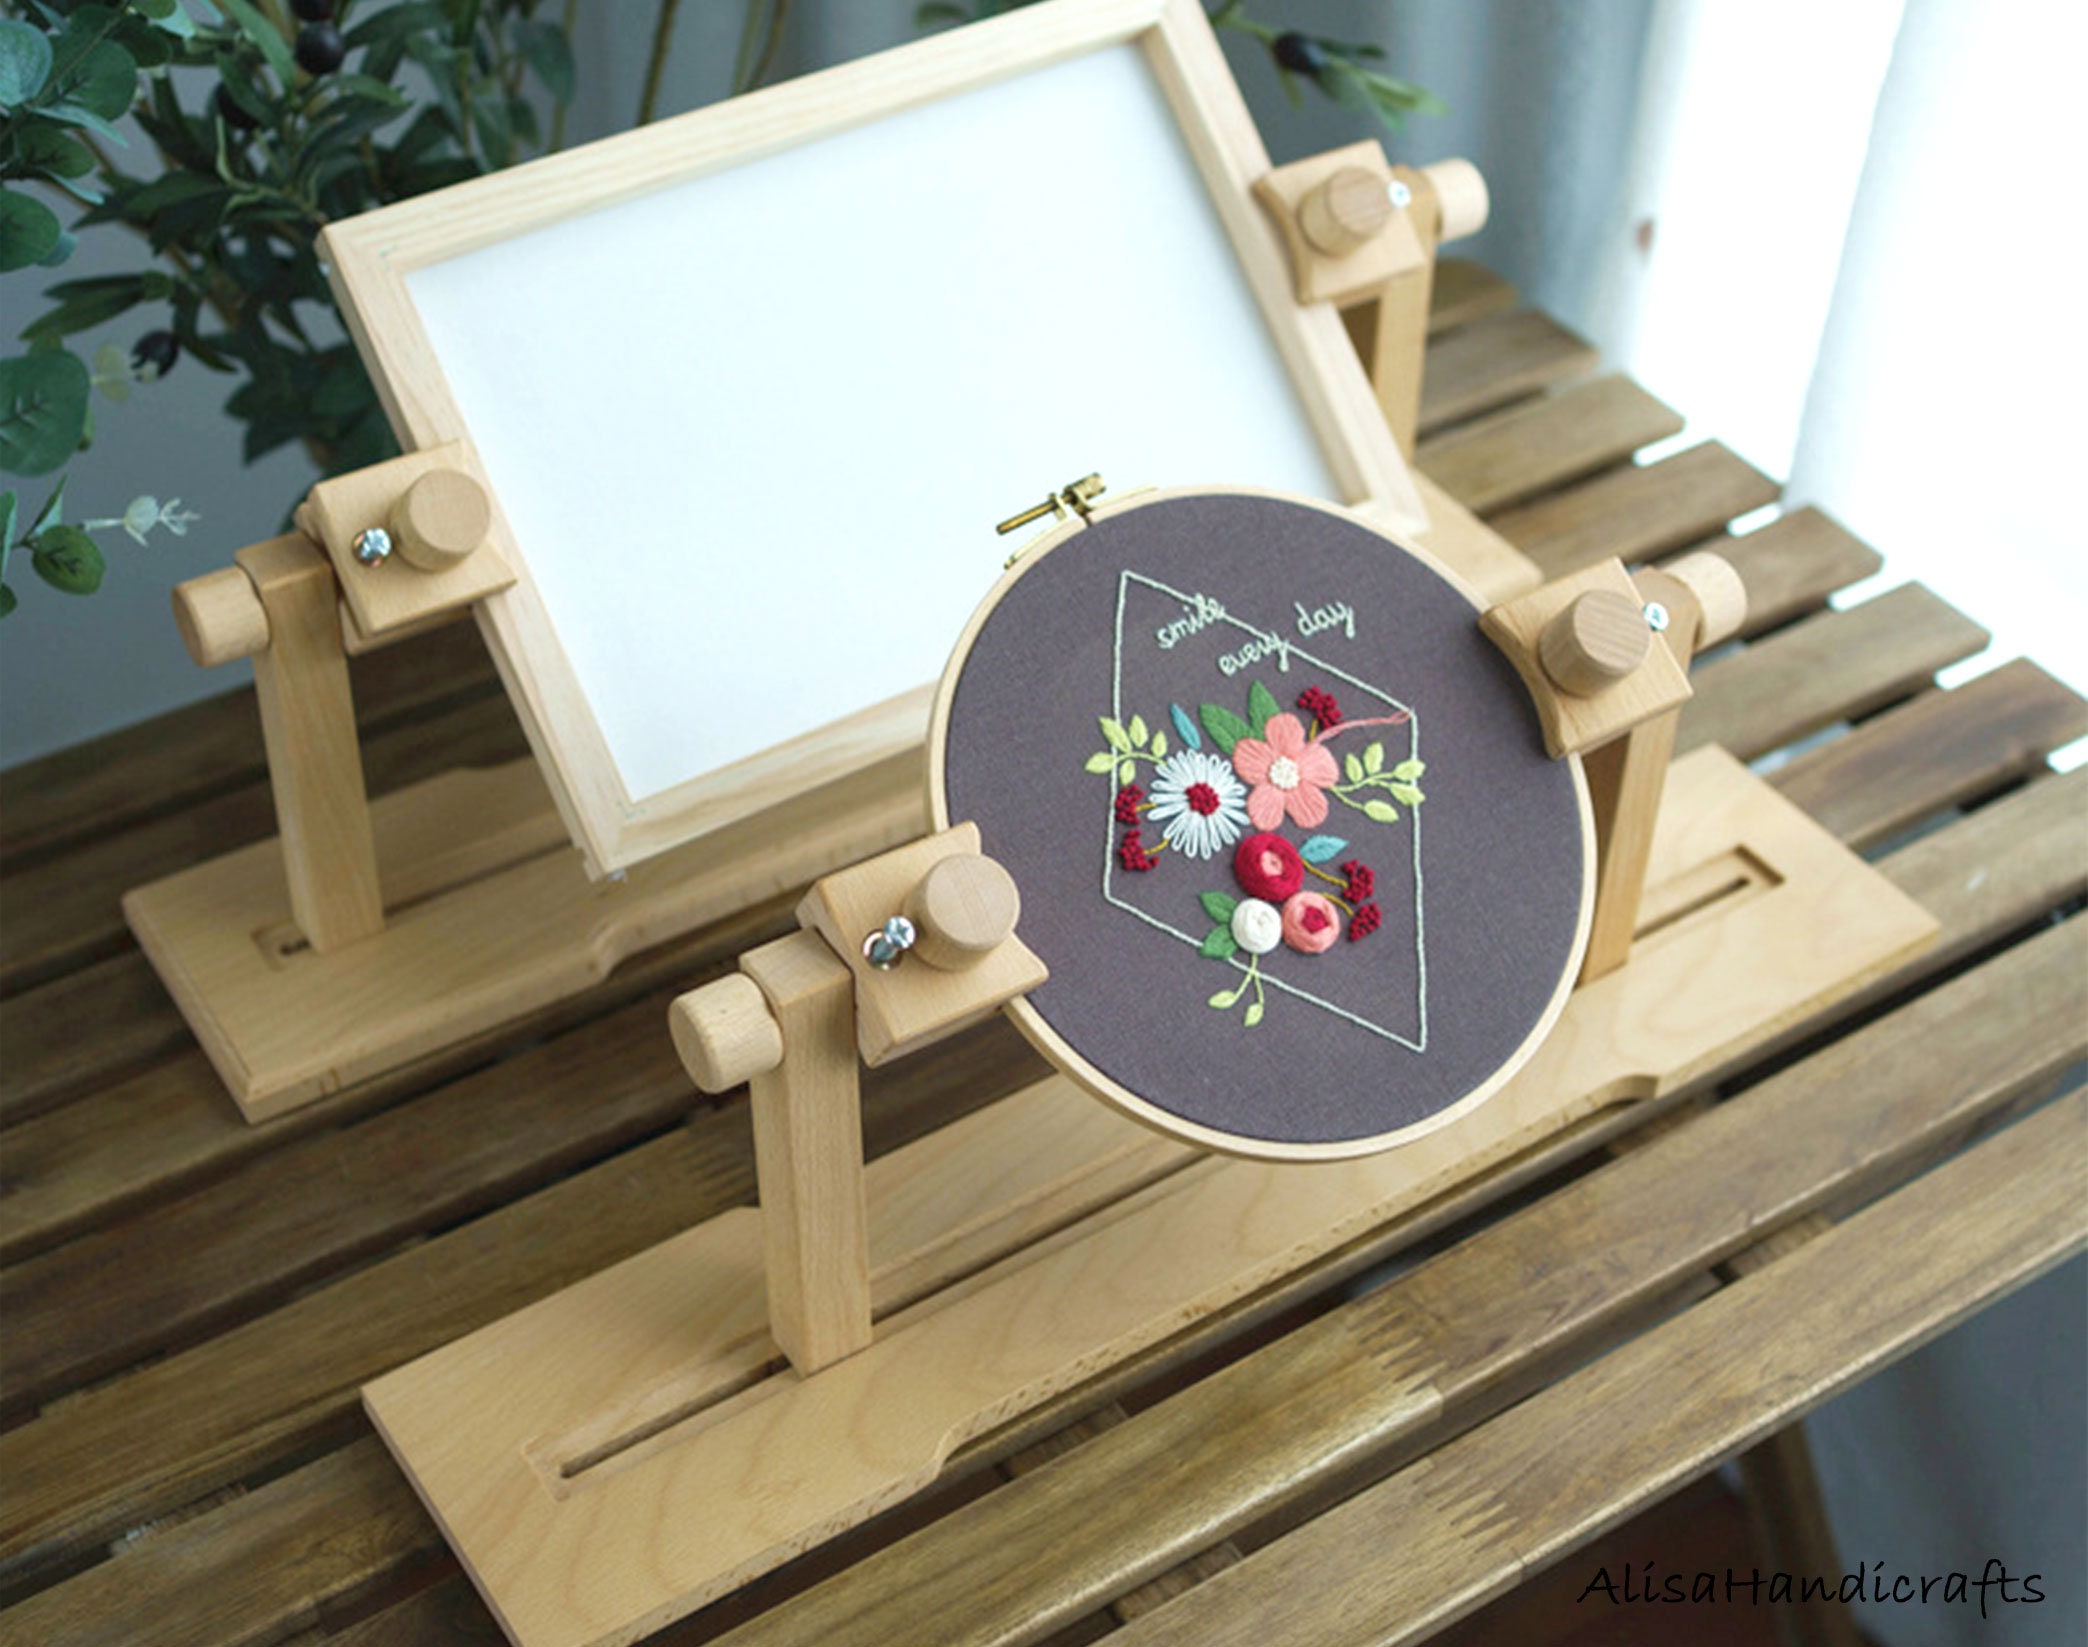 Embroidery Frame, Beech Wood, Square Shape, Tapestry Scroll, Stitching  Sewing Craft, Needlepoint, Cross Stitch Accessories,diy Crafting Tool 